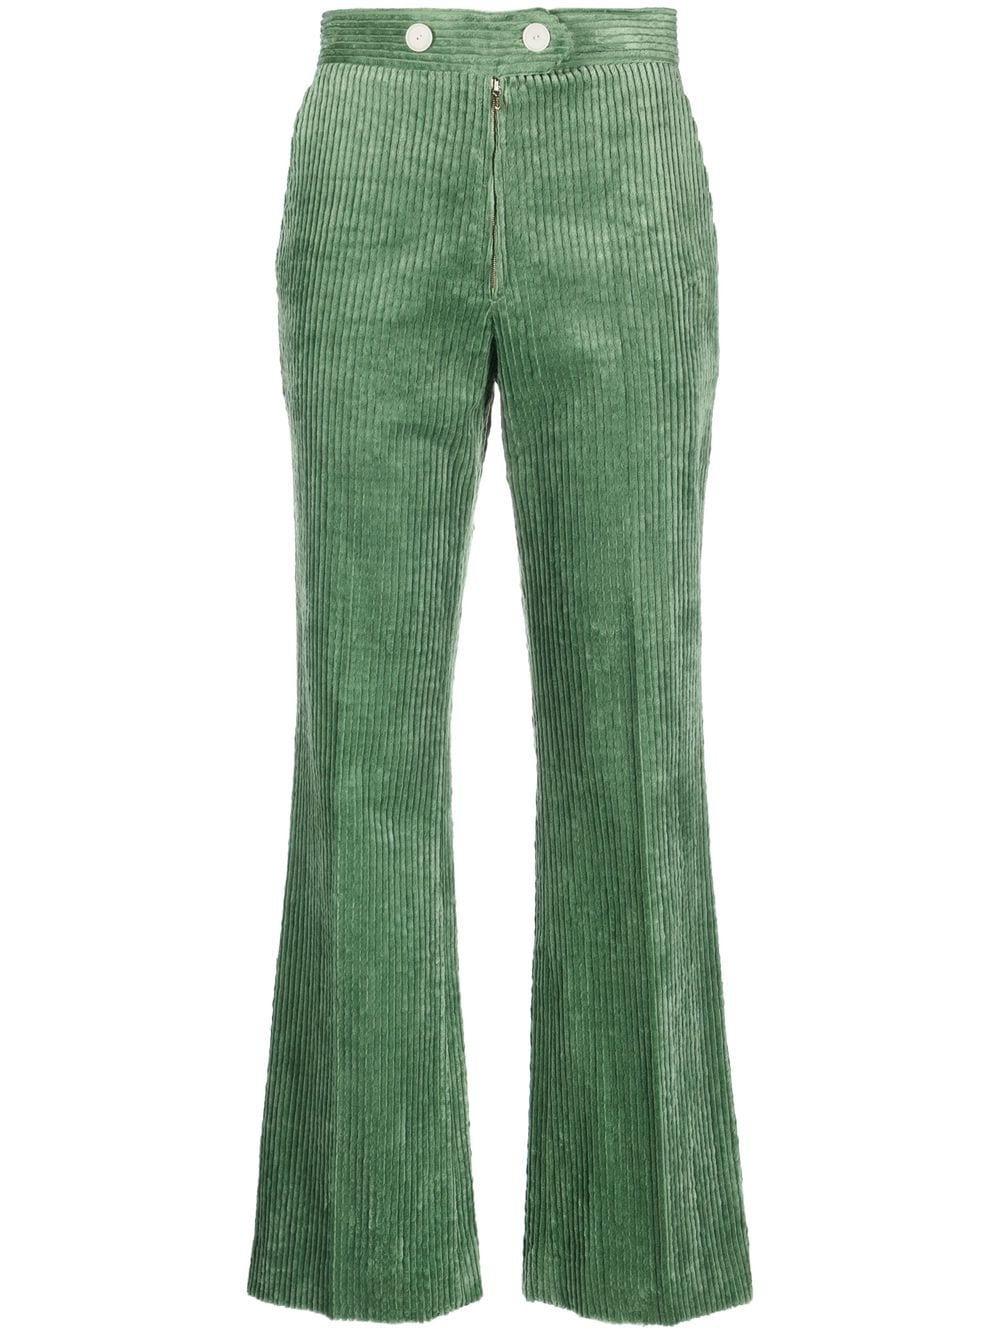 Sandro Corduroy Flared Trousers in Green | Lyst